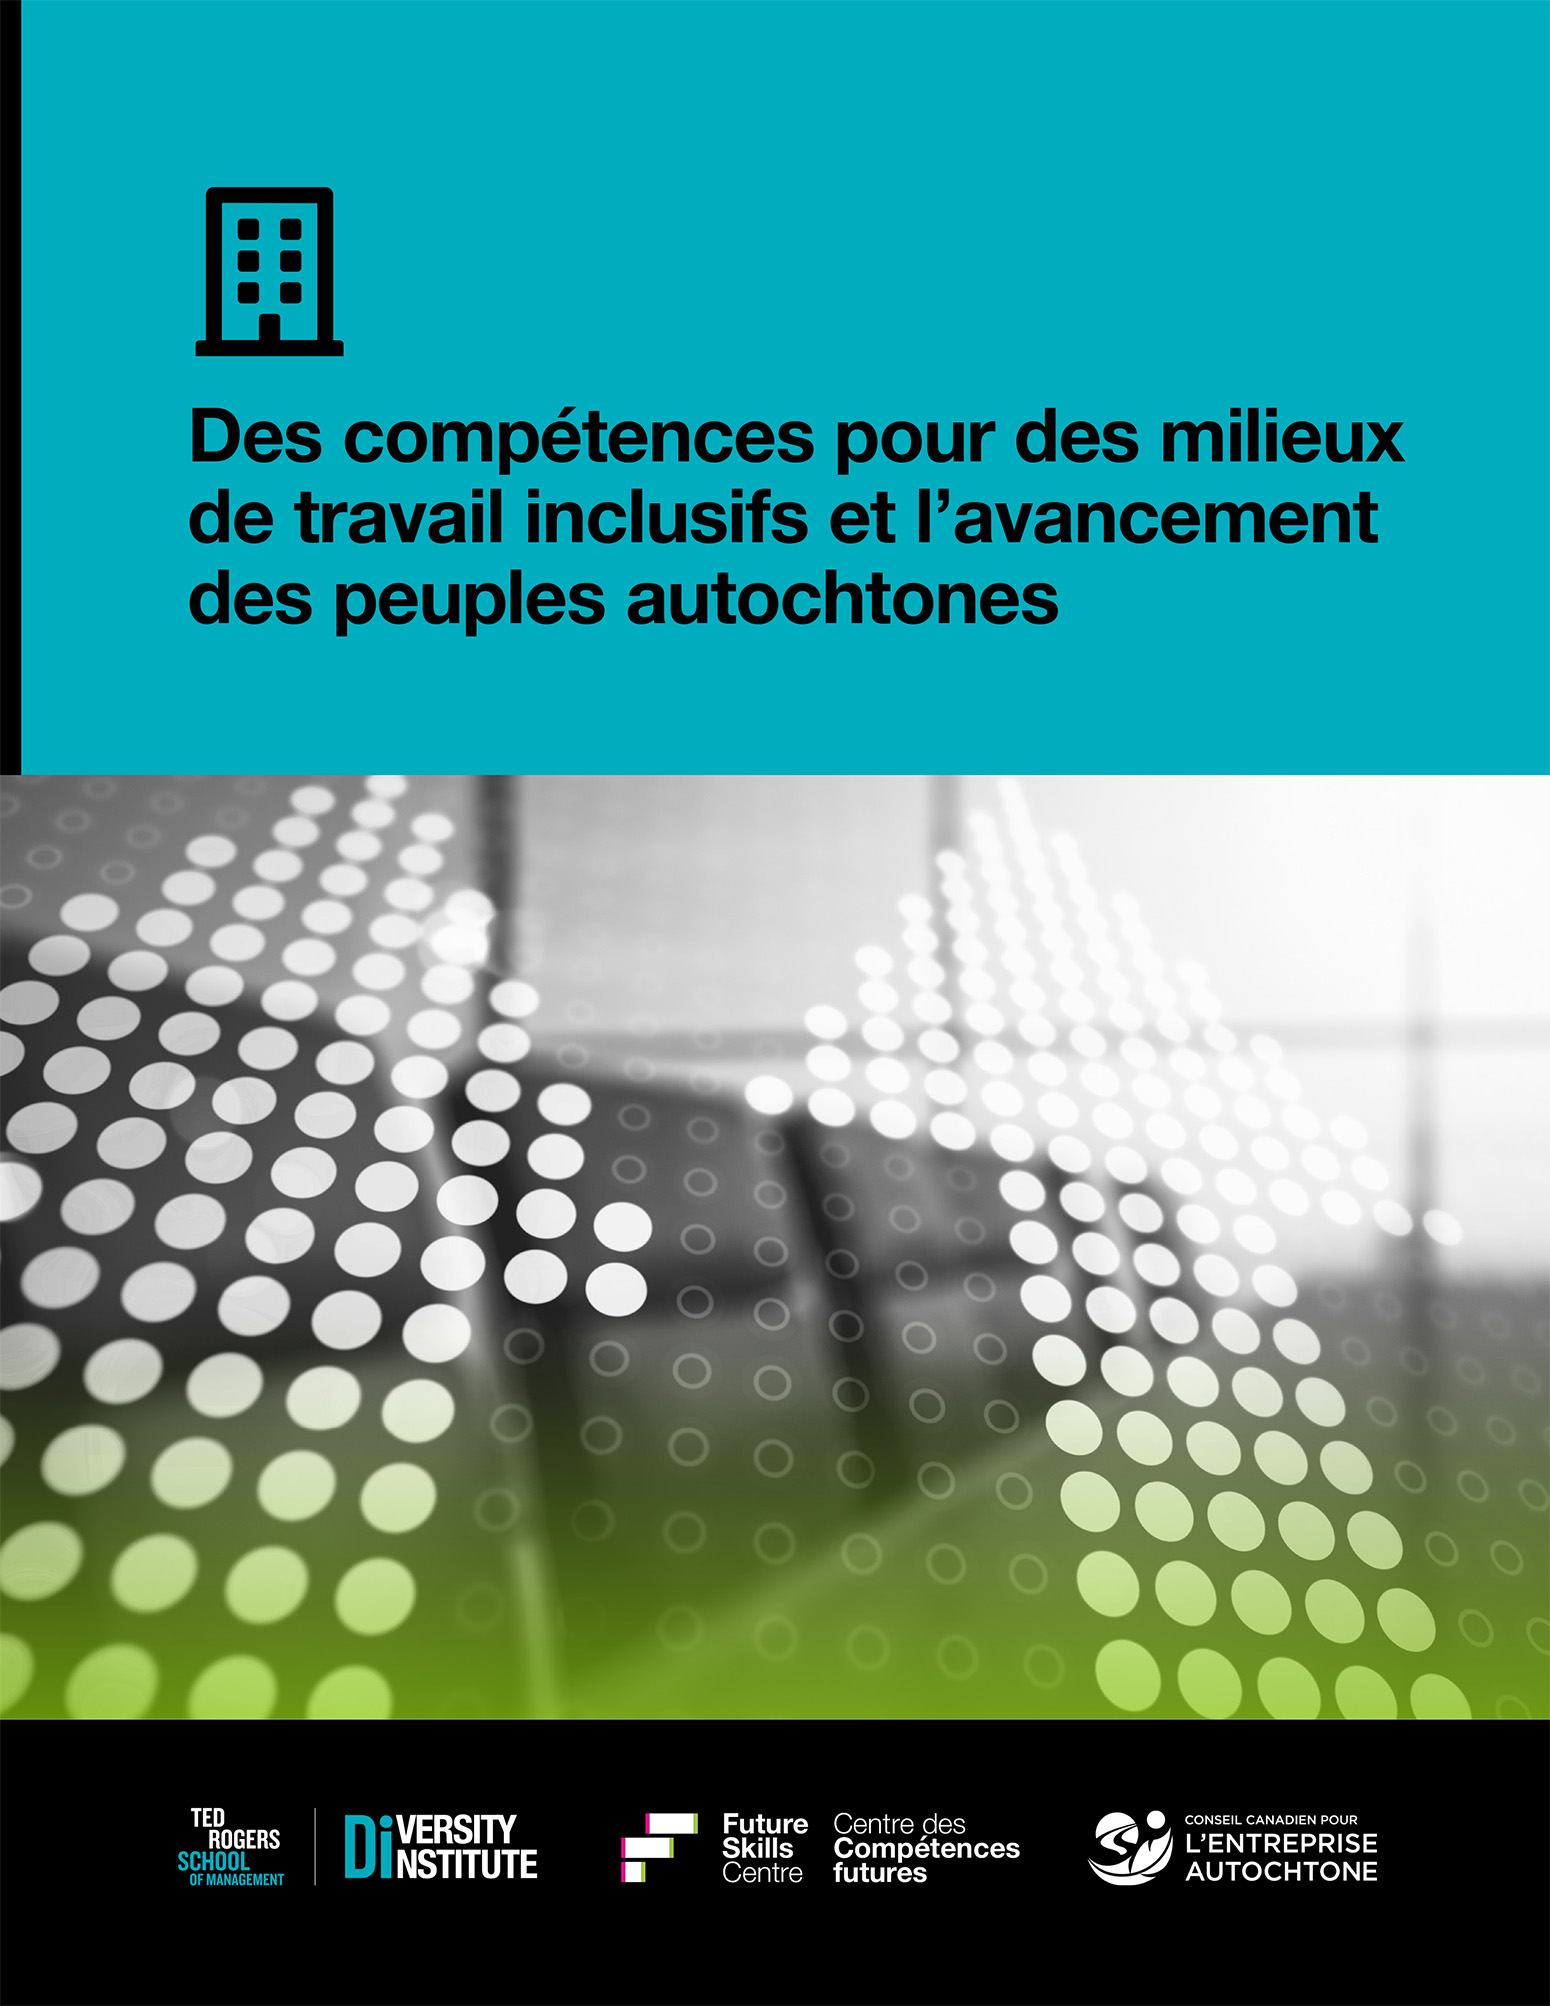 The cover of a report in French with upward arrows made up of dots.